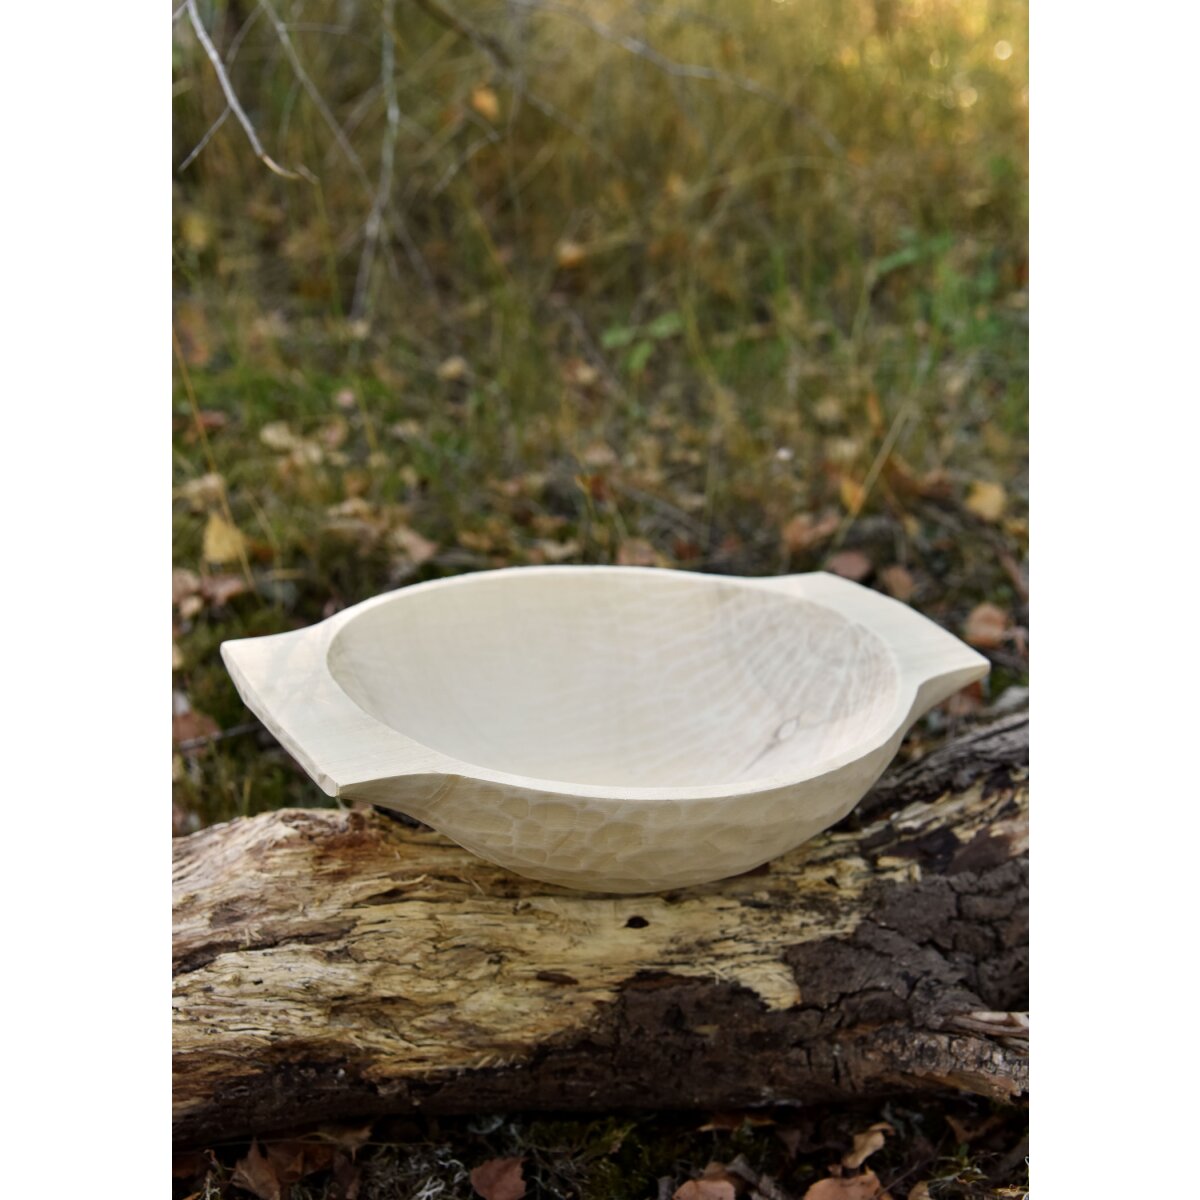 Woden bowl with handles, hand-carved, approx. 32 x 24 cm